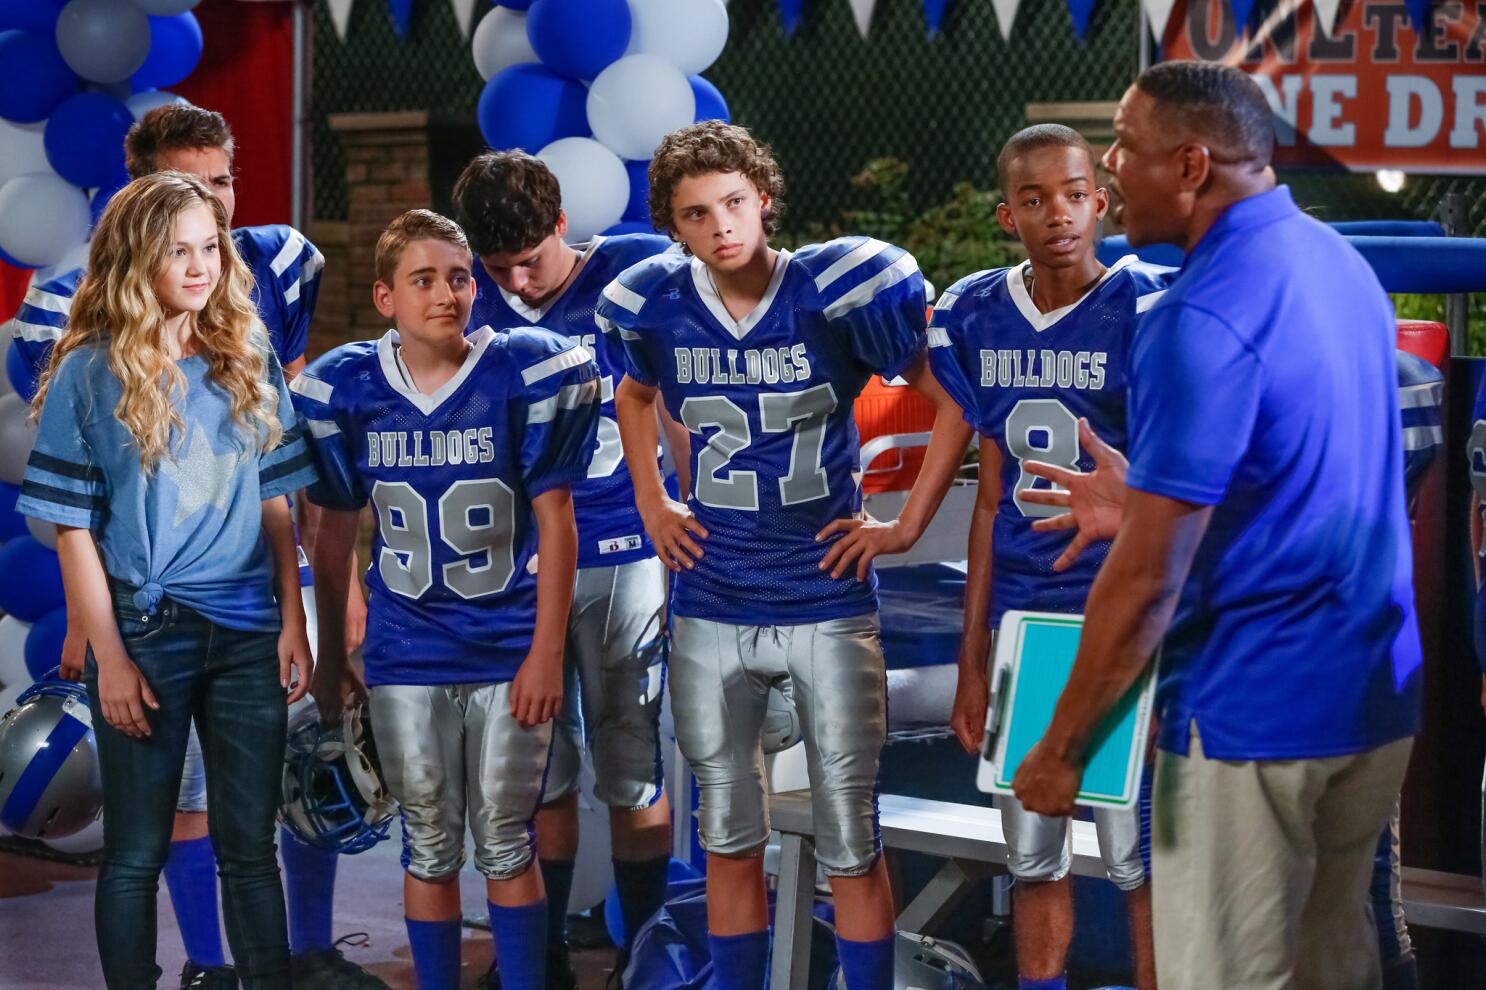 Review: The fine 'Bella and the Bulldogs' mixes football, gender issues -  Los Angeles Times